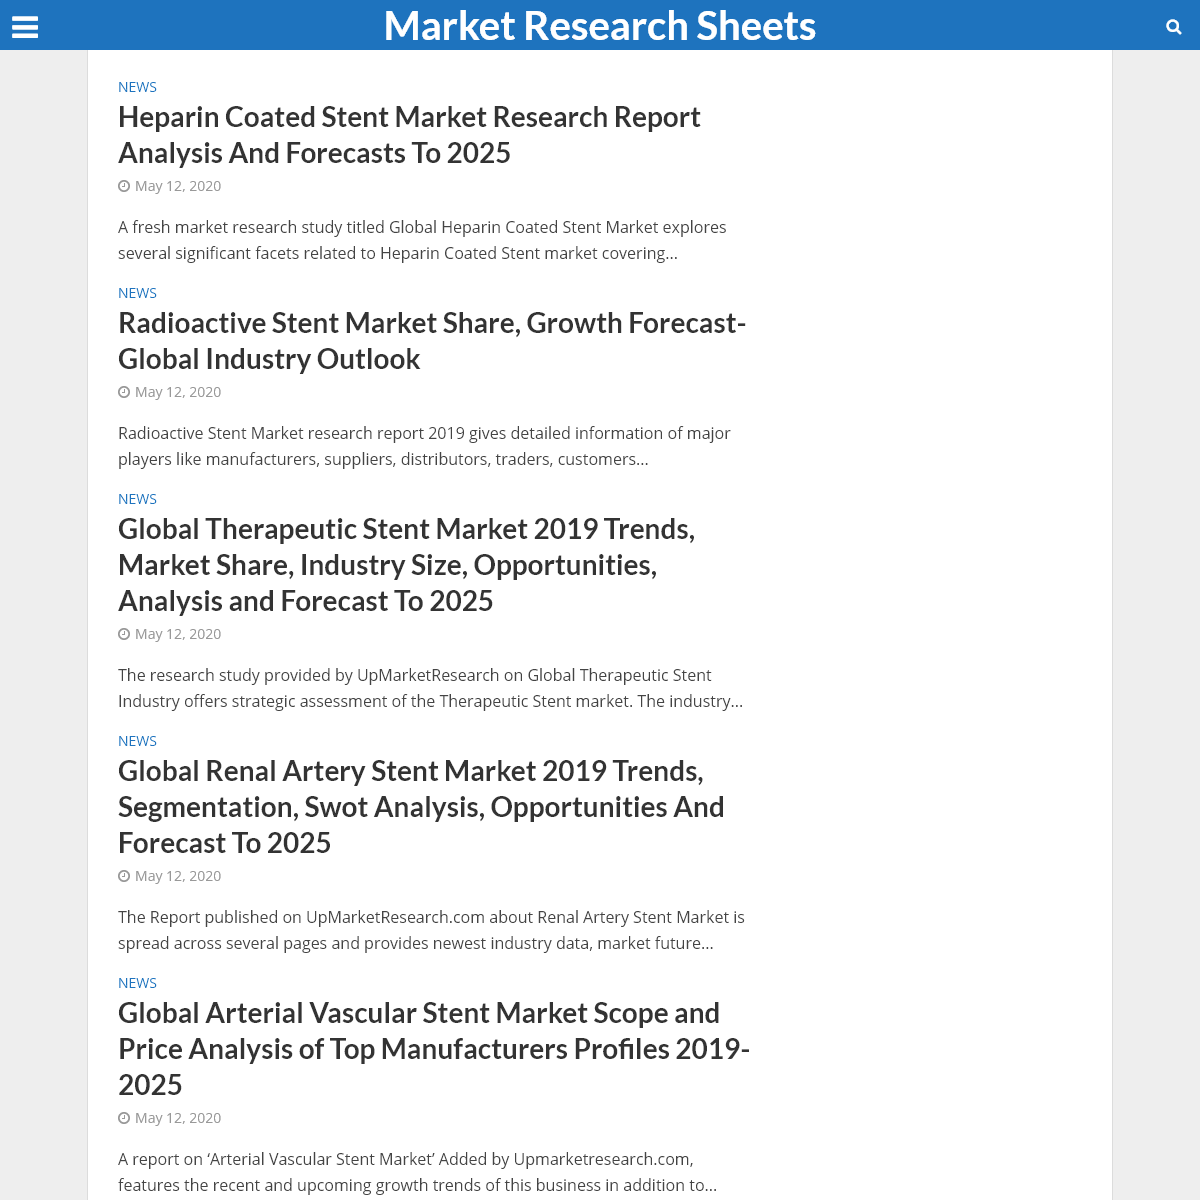 A complete backup of marketresearchsheets.com